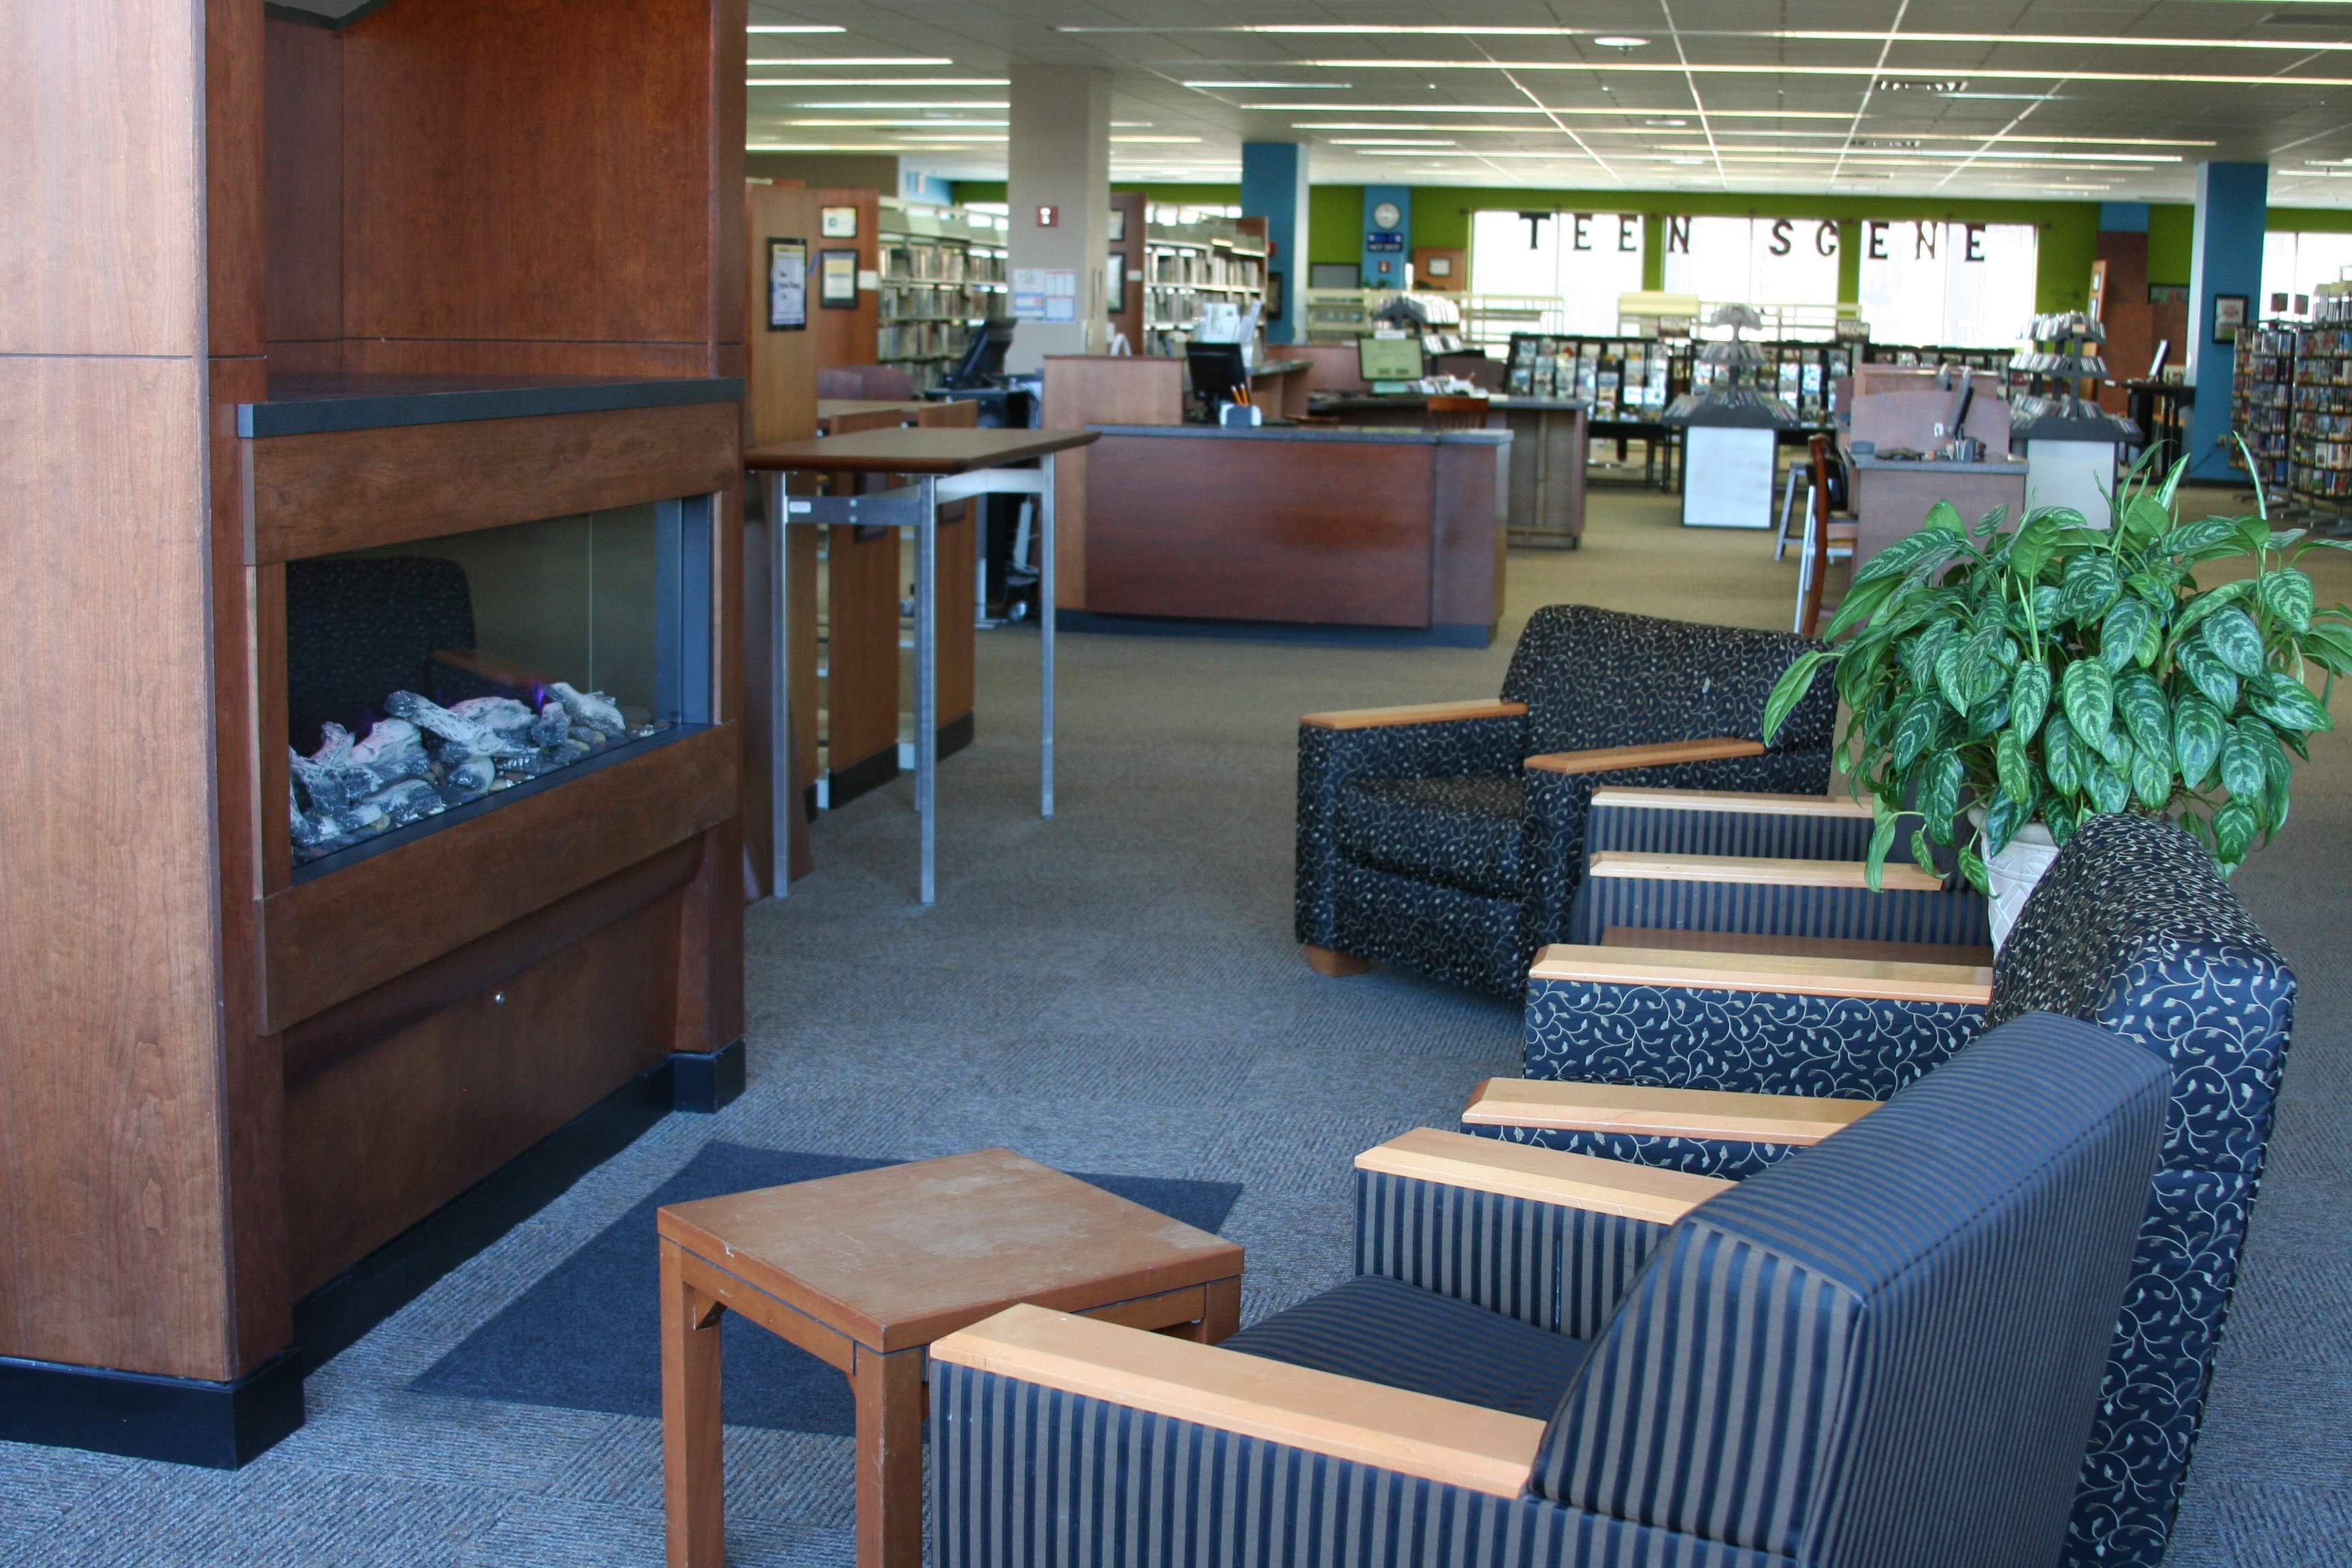 Chairs surrounding fireplace in library